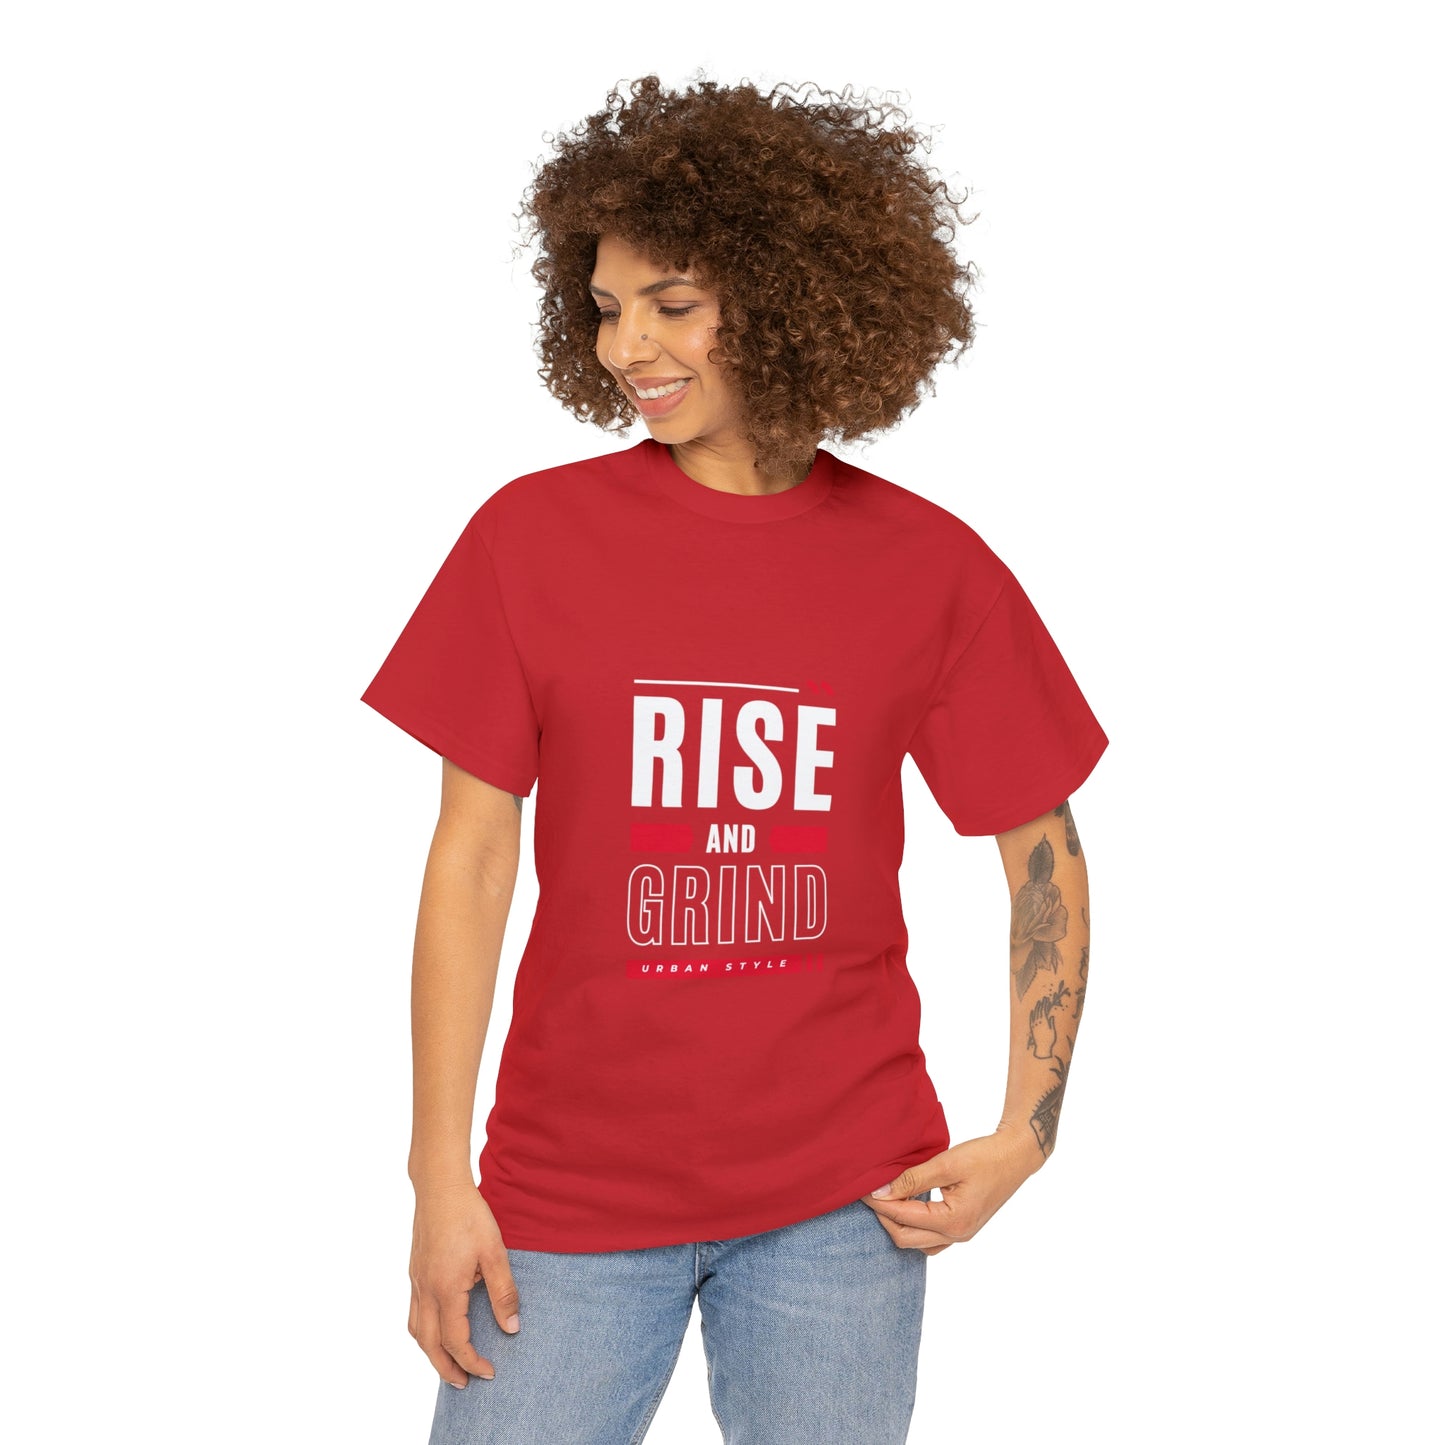 Rise and grind Your Style  Our Custom Printed Tee Unique Design Comfortable Fit  Personalized for You.  color, funny tshirt tee shirt